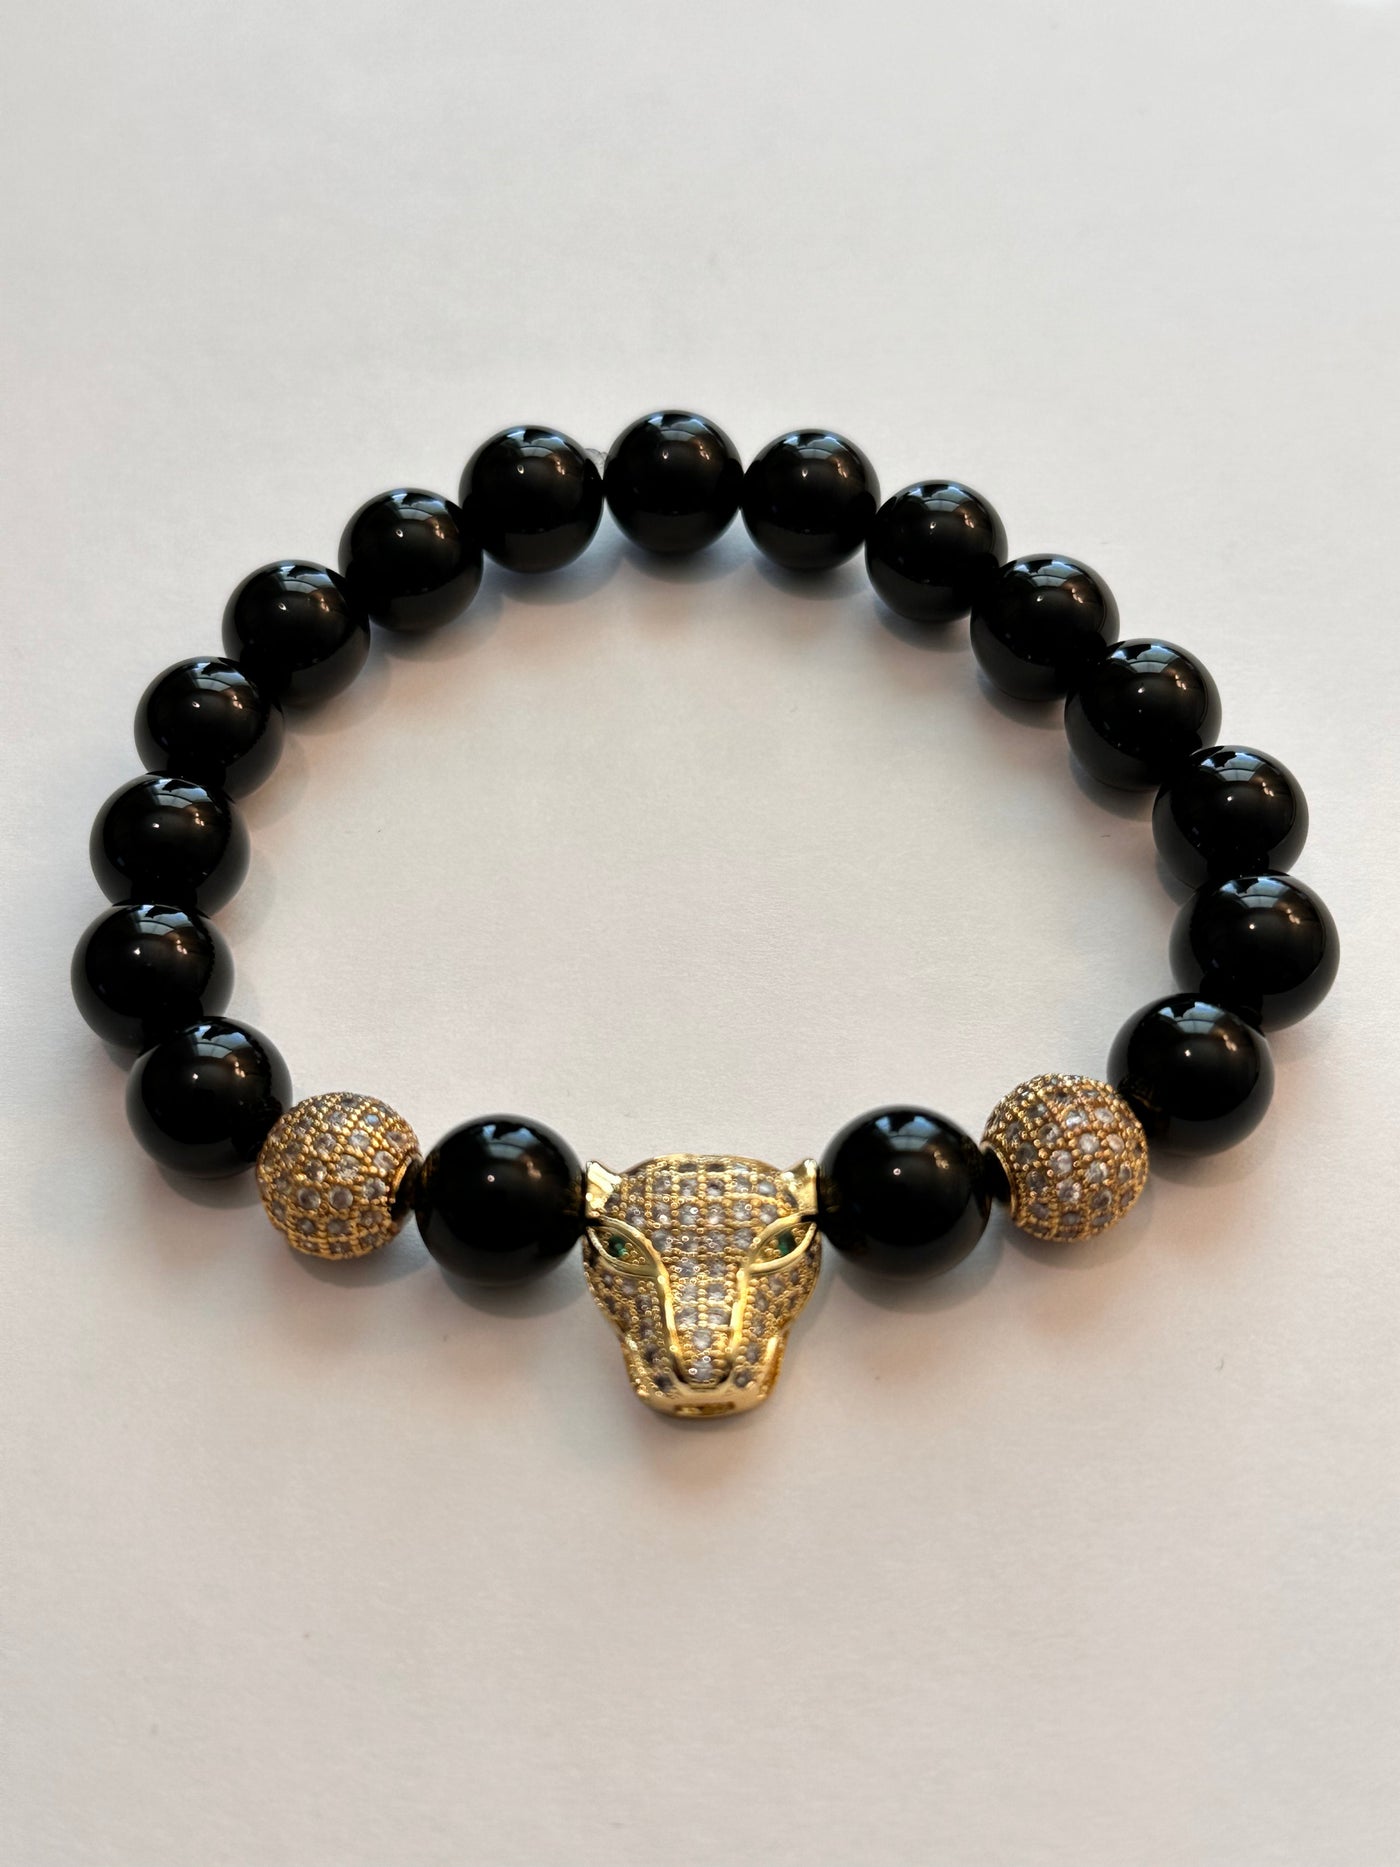 Panther Bracelet Gold plated Stainless Steel with Black Onyx Beads - Brent's Bling